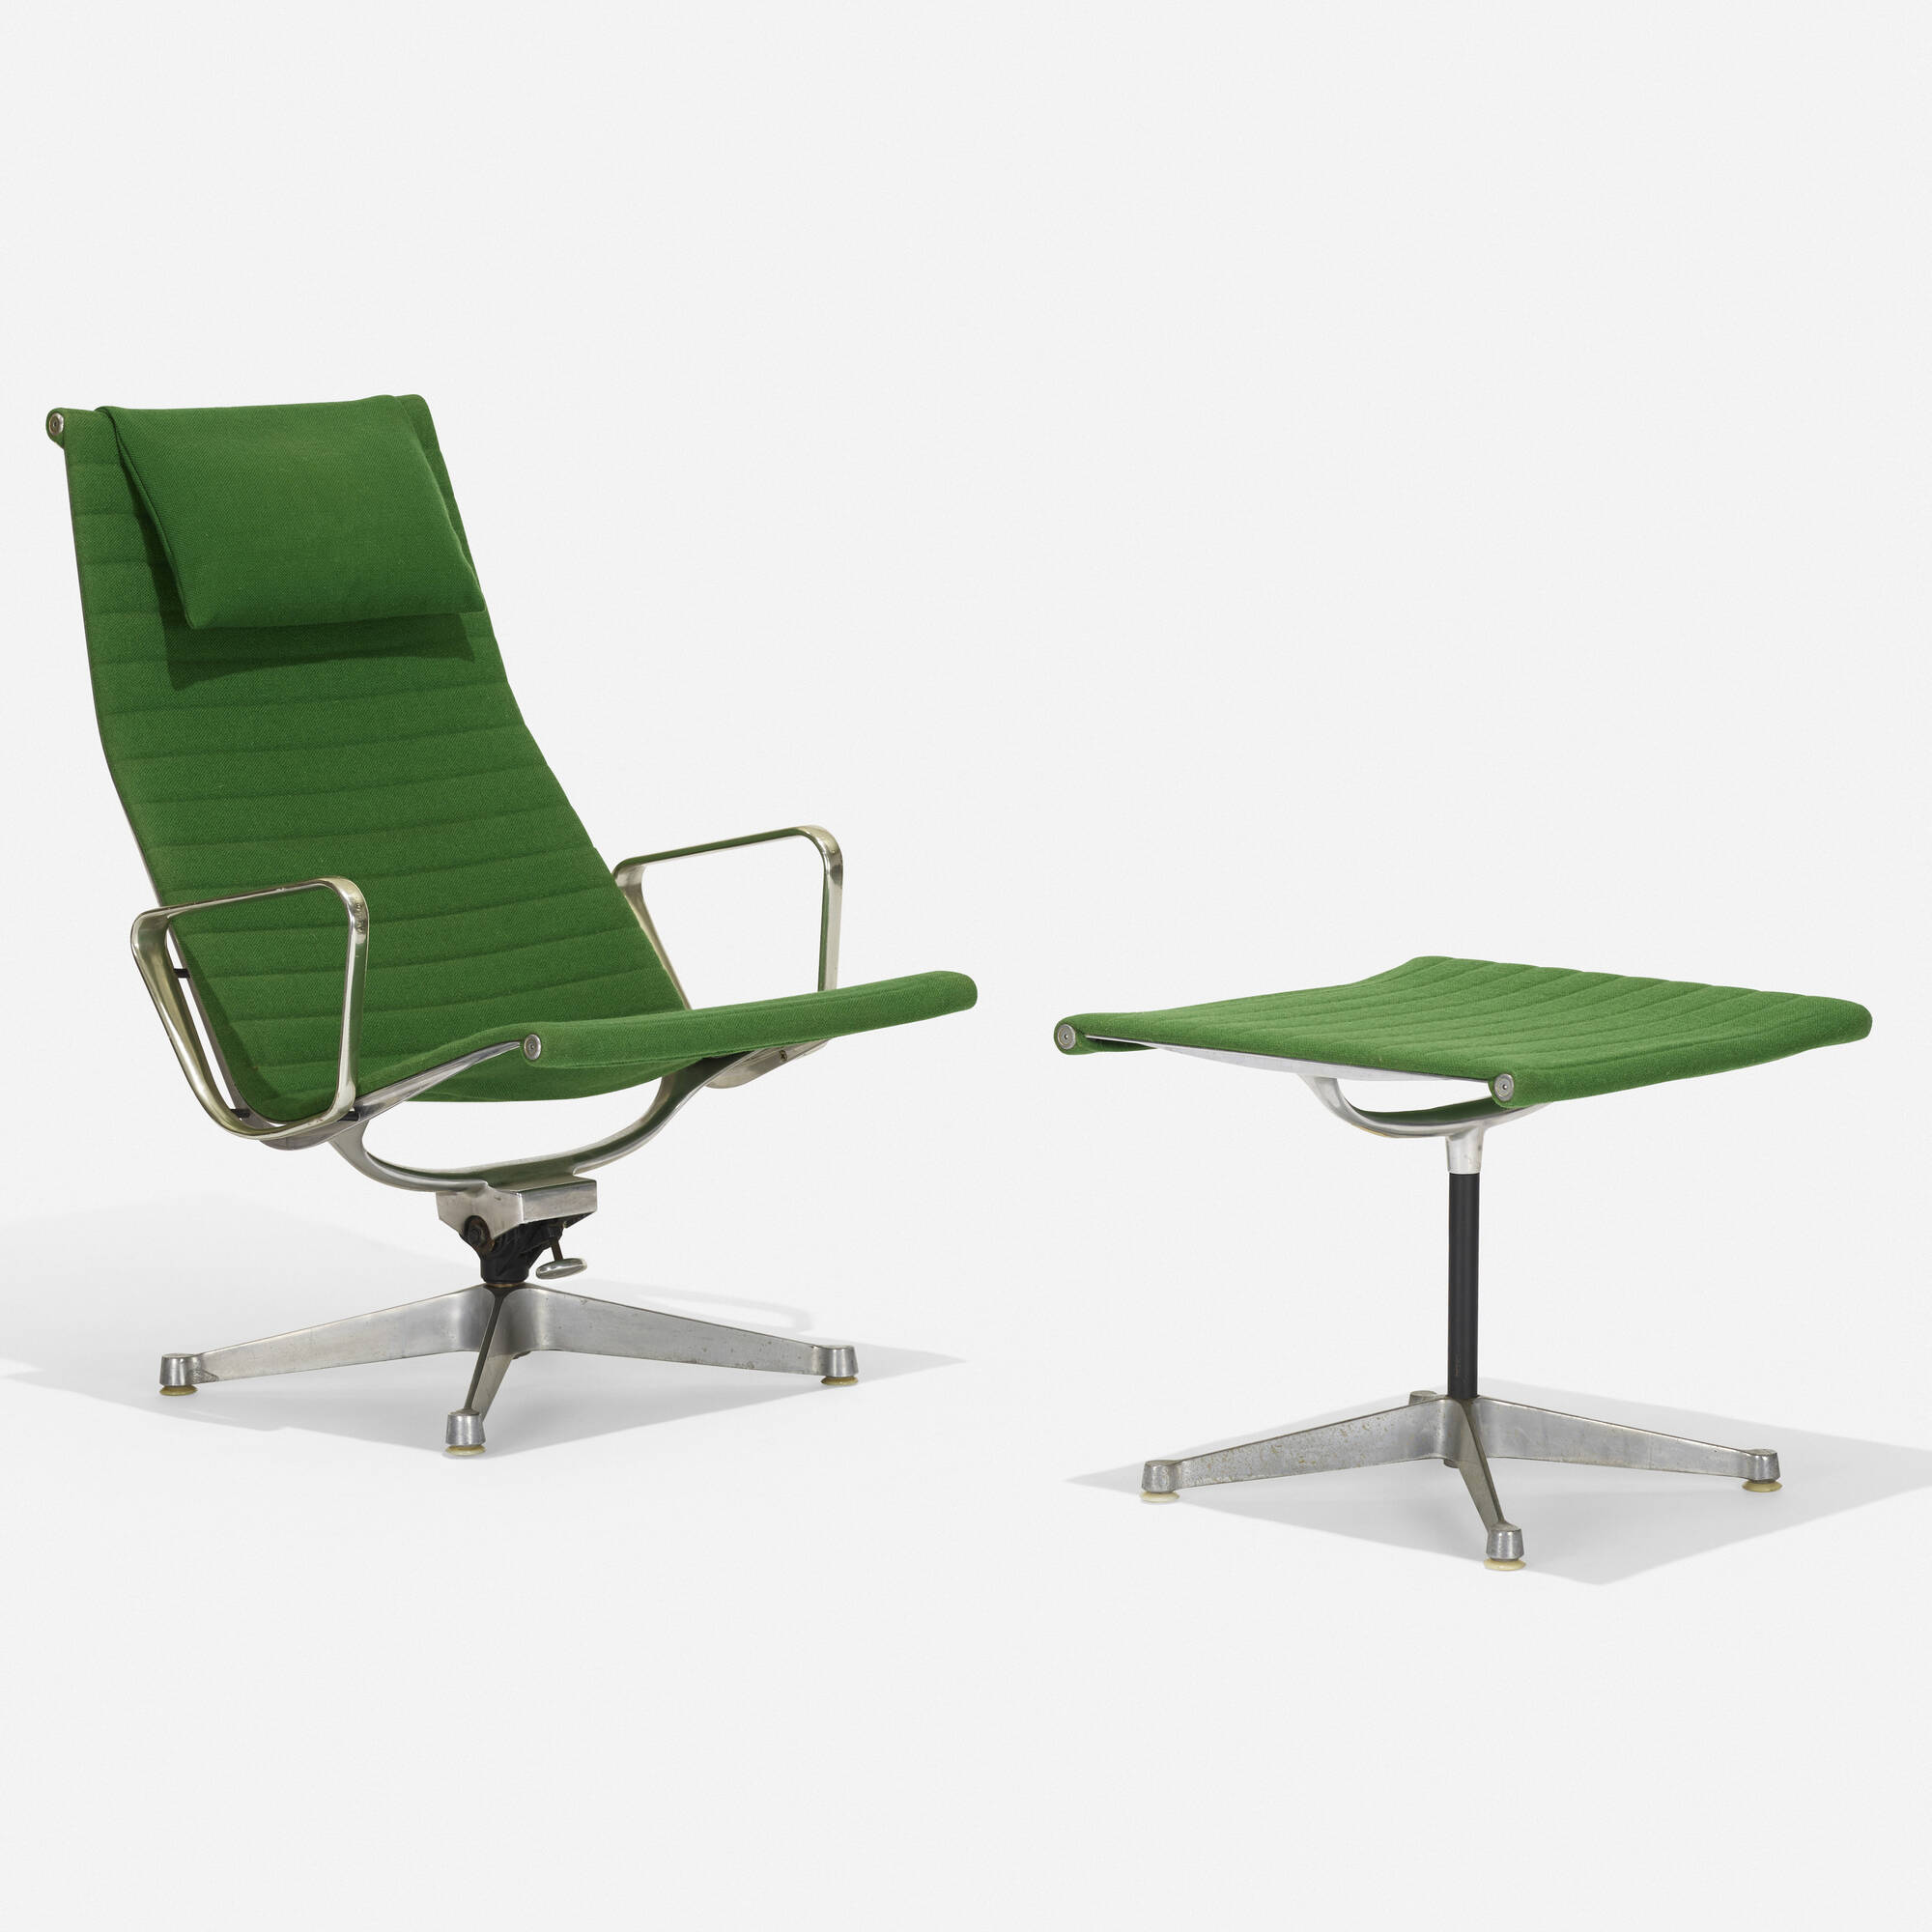 229: CHARLES AND RAY EAMES, Aluminum Group lounge chair and